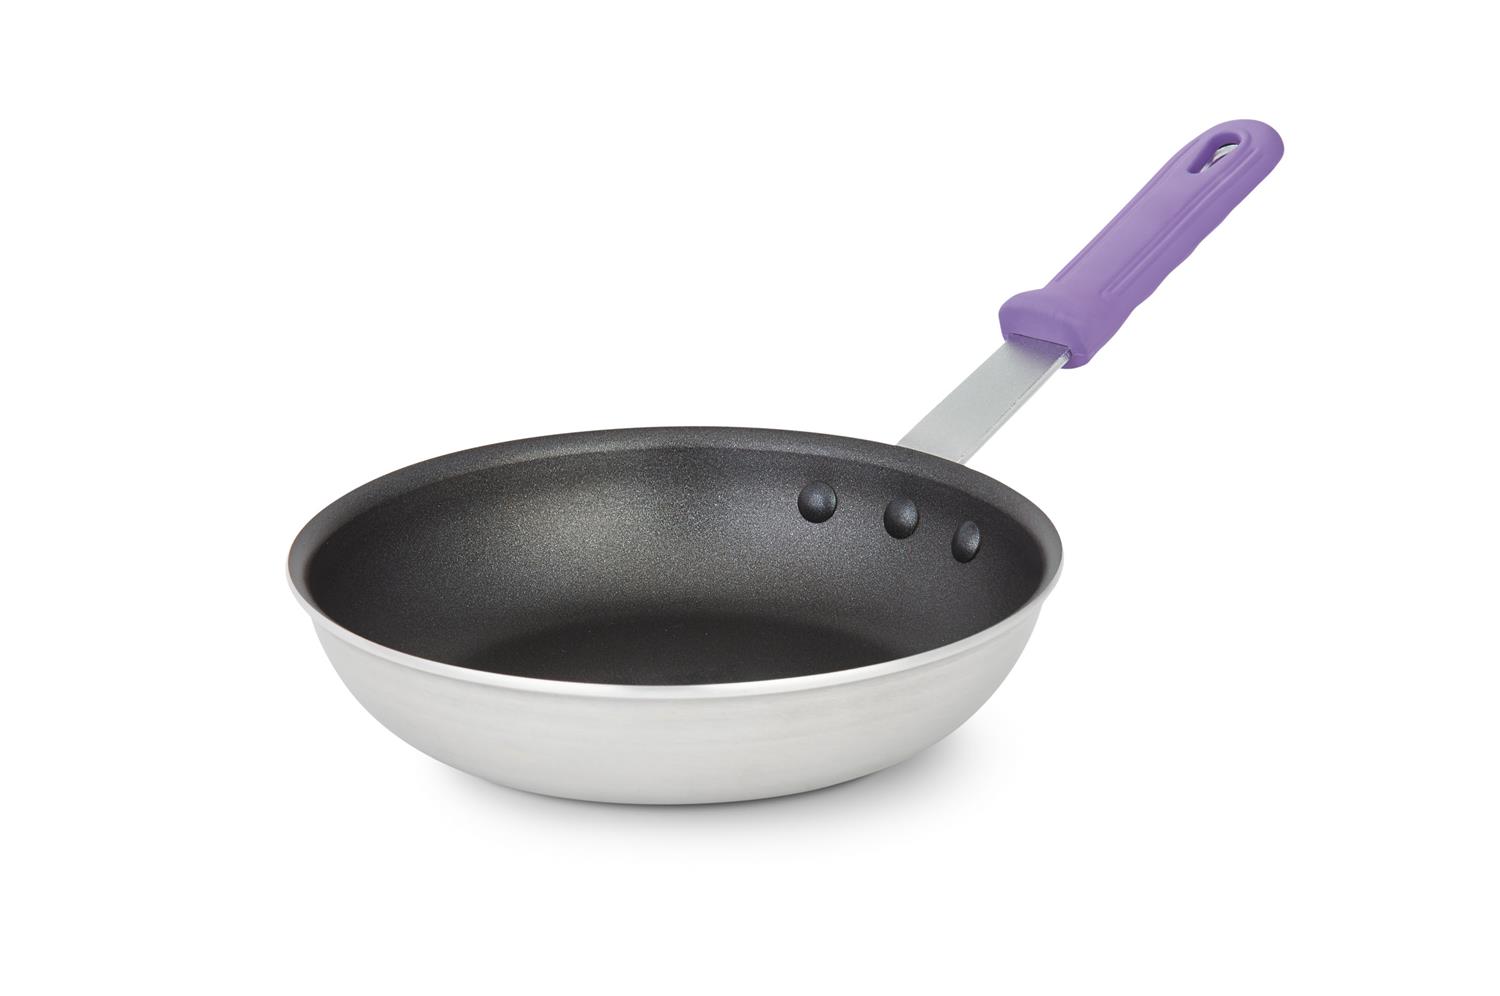 Vollrath T400880 Wear-Ever Fry Pans with SteelCoat x3 Interior and Purple Handle